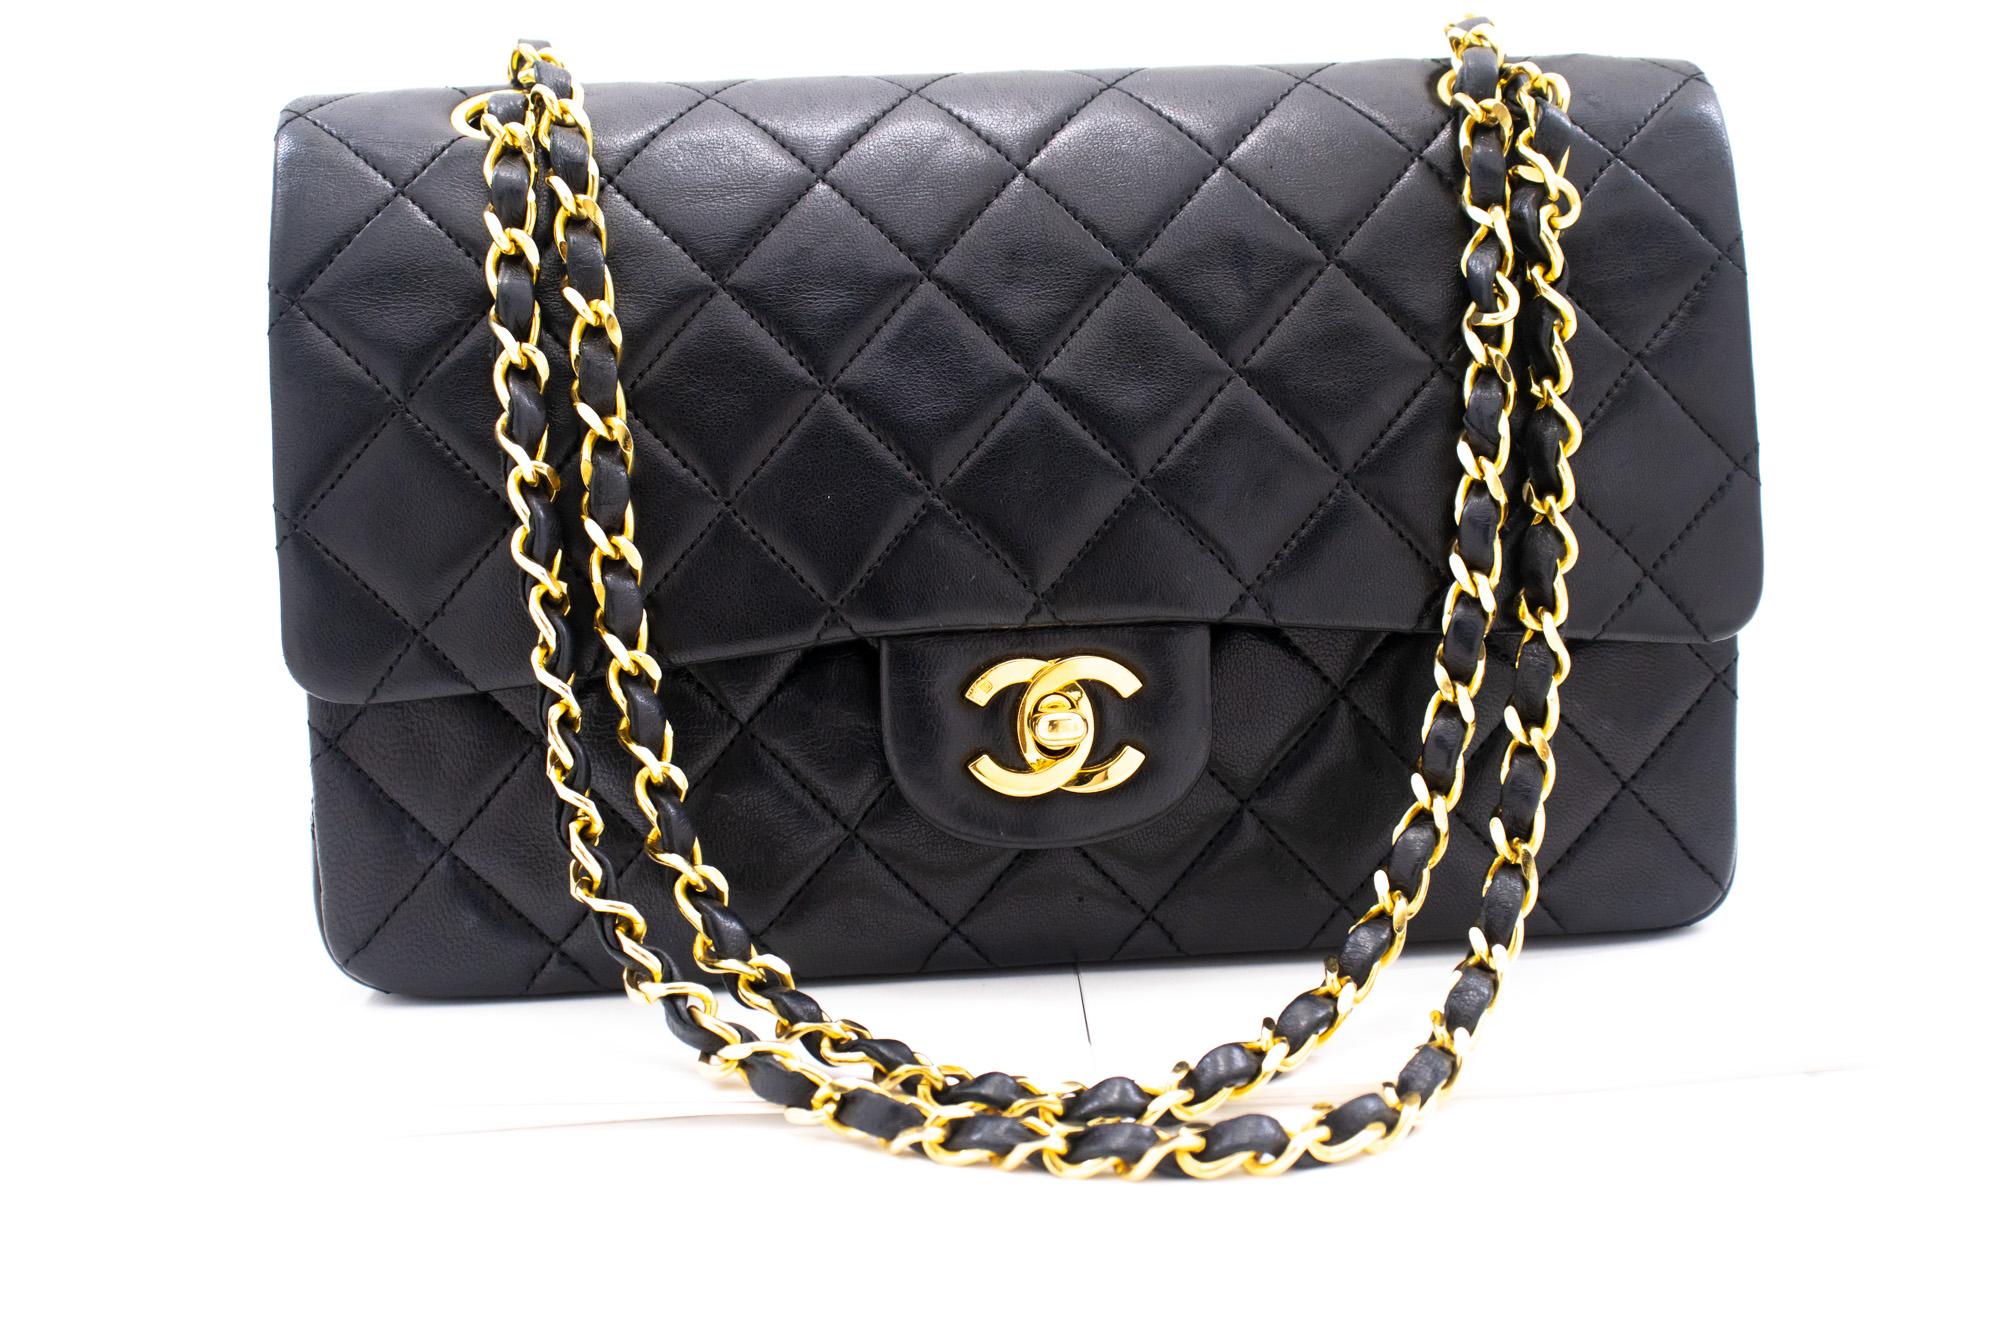 An authentic CHANEL Classic Double Flap Medium Chain Shoulder Bag Black Lamb. The color is Black. The outside material is Leather. The pattern is Solid. This item is Vintage / Classic. The year of manufacture would be 1986-1988.
Conditions &